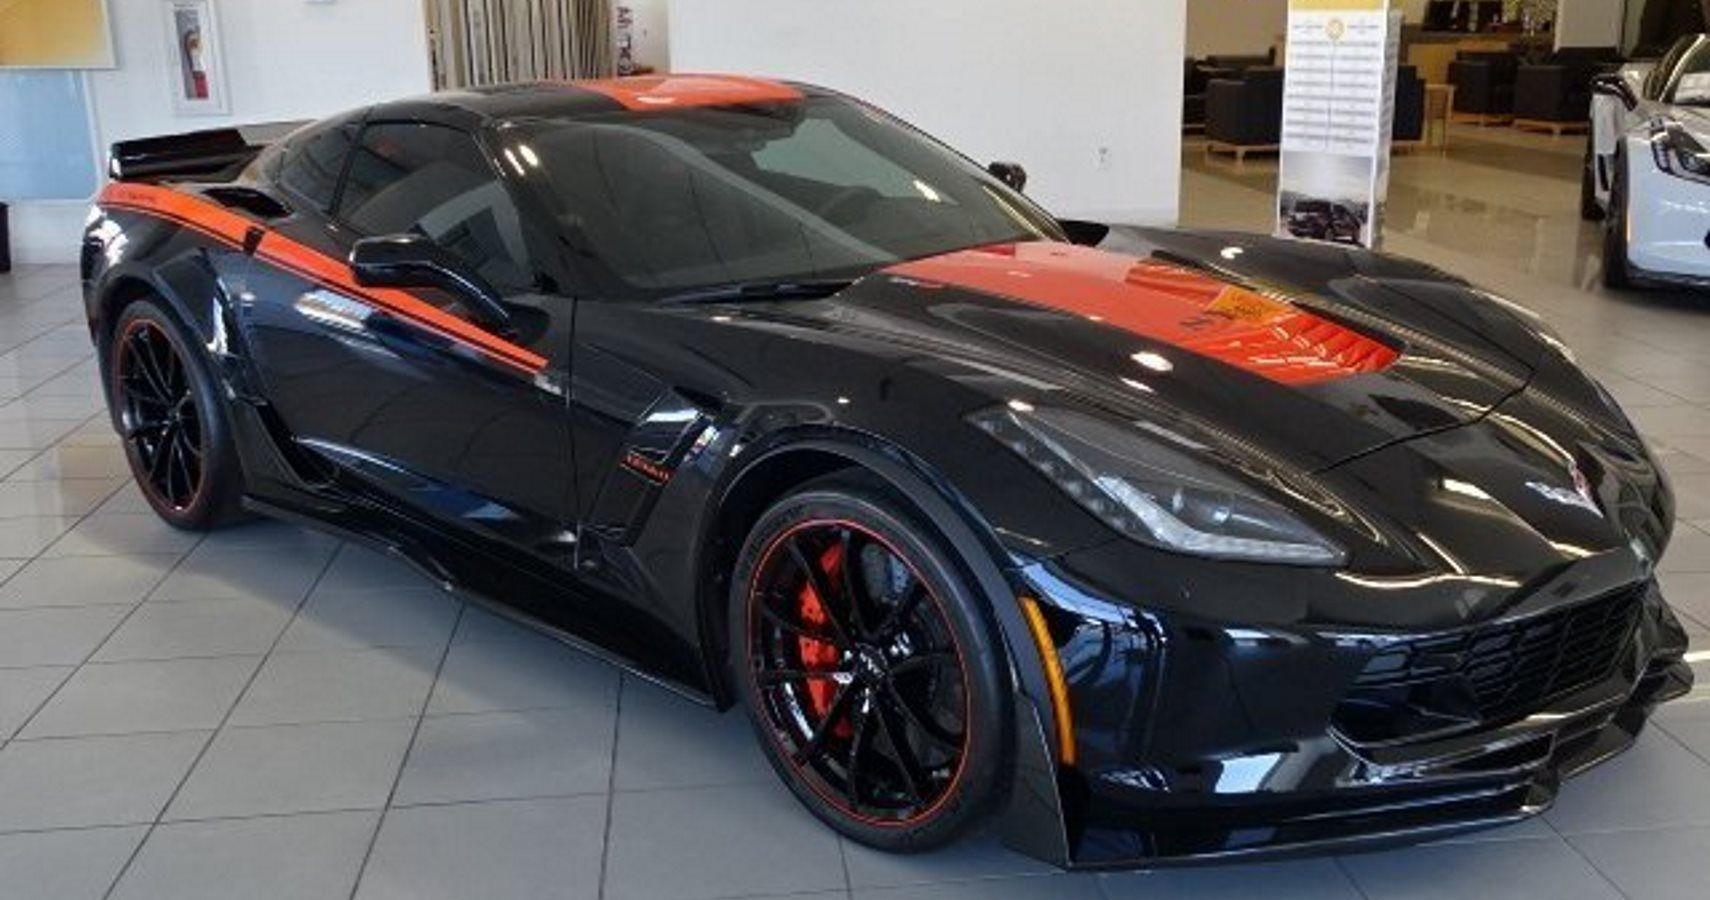 Used Corvette Goes On Sale For Incredible Price